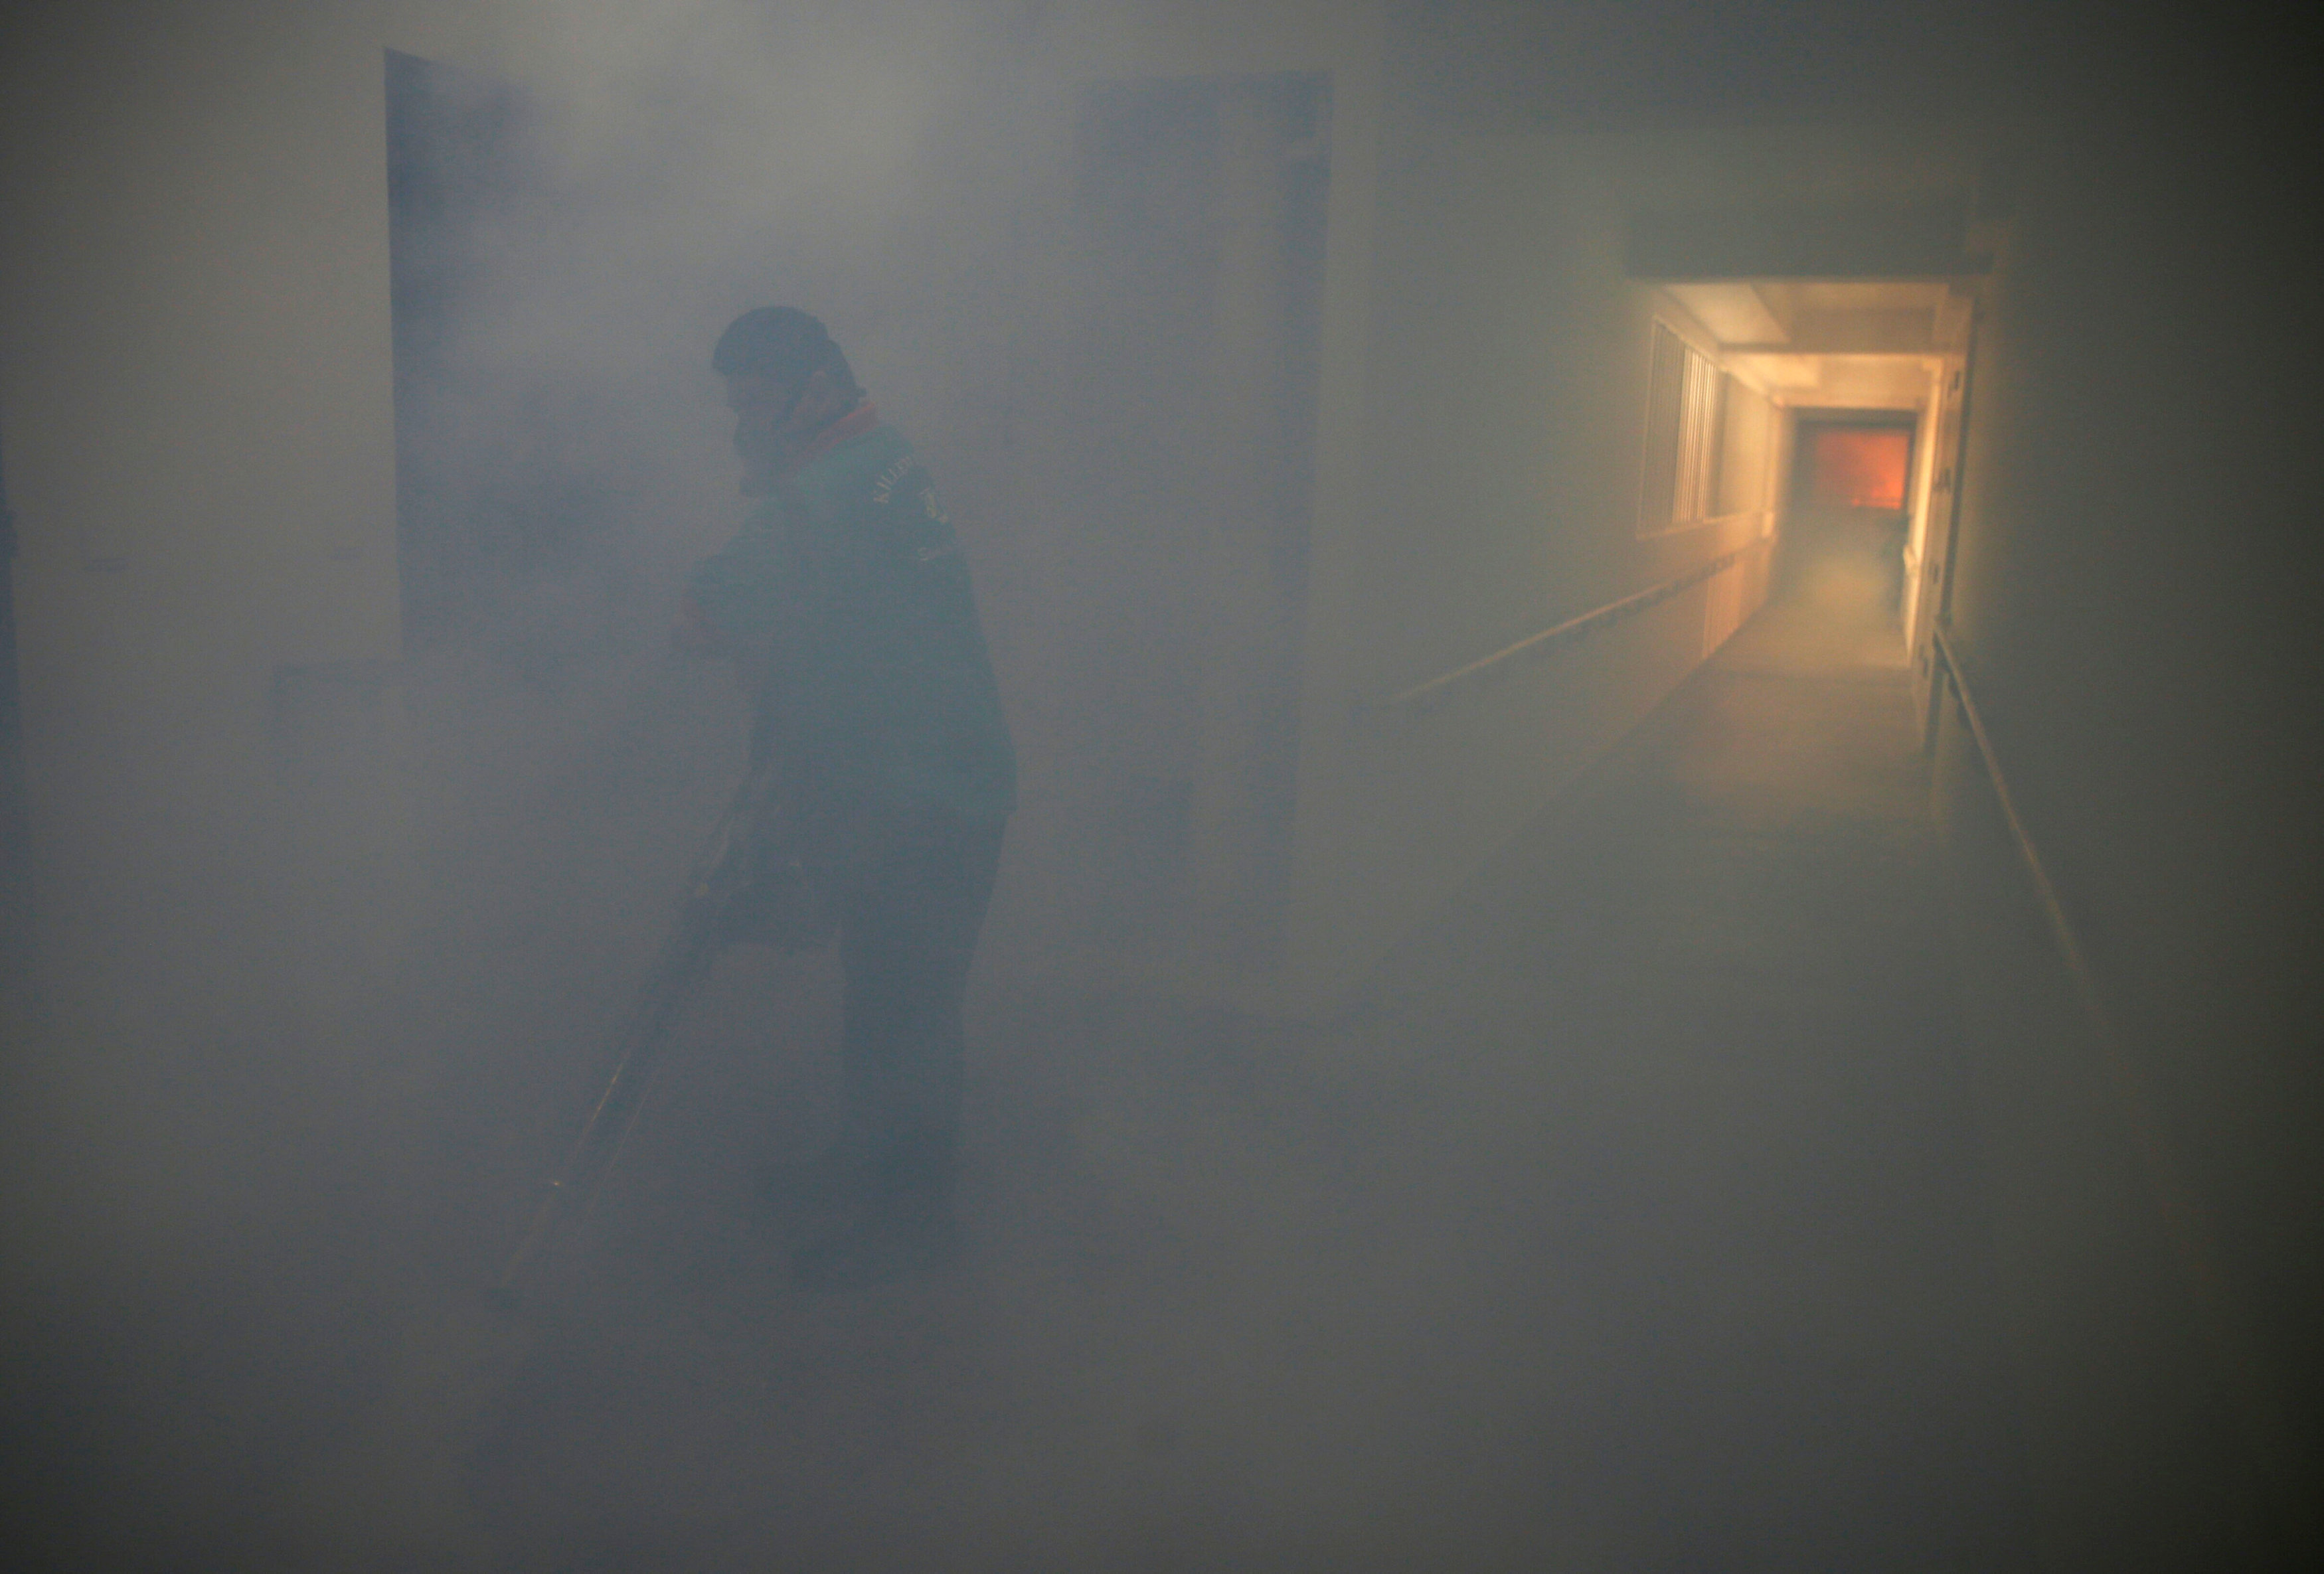 A worker fogs the corridor of a public housing estate in the vicinity where a locally transmitted Zika virus case was discovered, in Singapore August 29, 2016. REUTERS/Edgar Sun